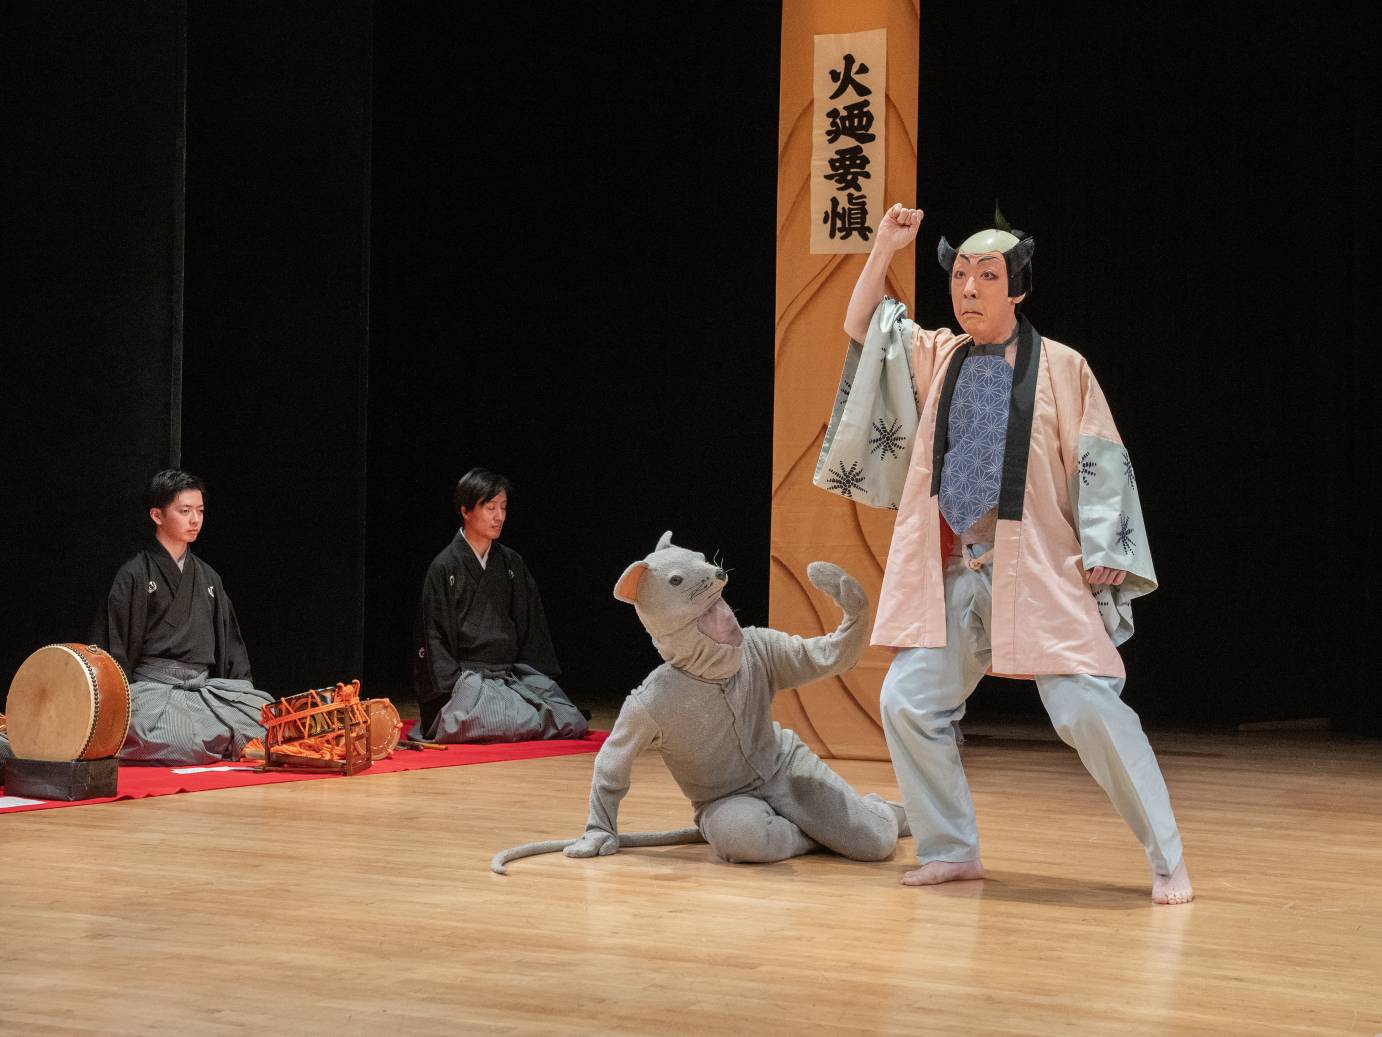 The servant character stands above the human sized mouse character who is beseeching from the floor. Two musicians sit with knees folded beneath their bodies looking ahead.